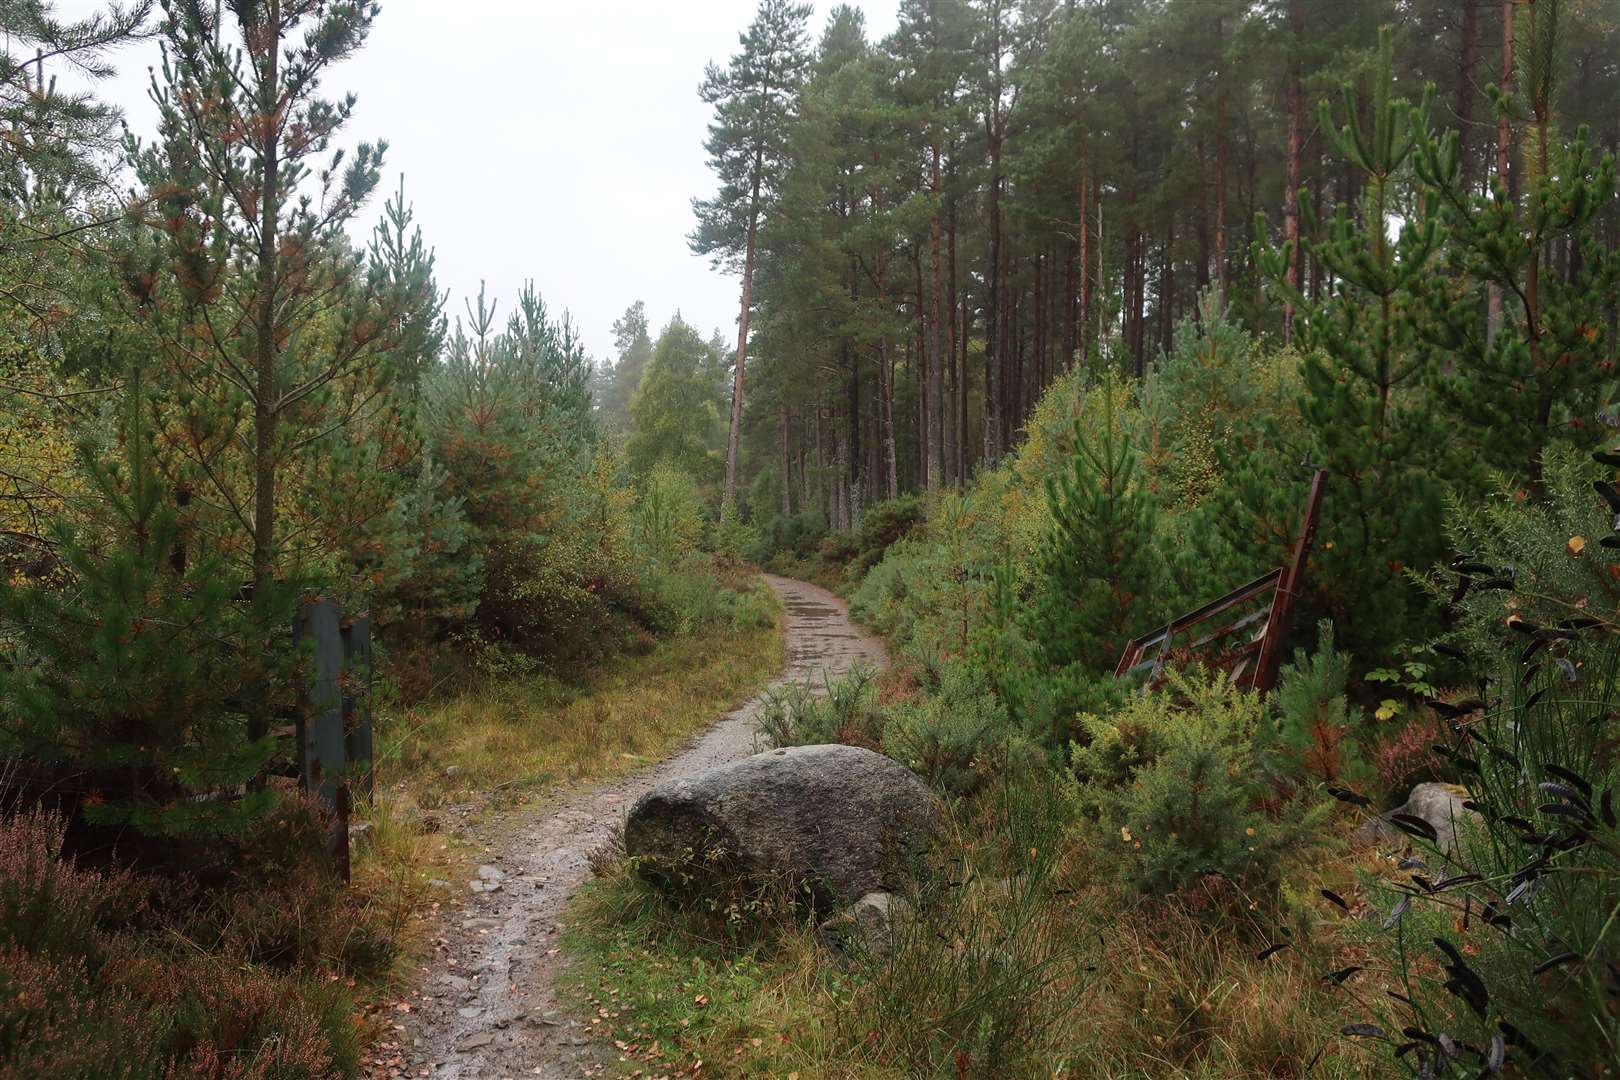 A stretch of trail in the woods at Contin.